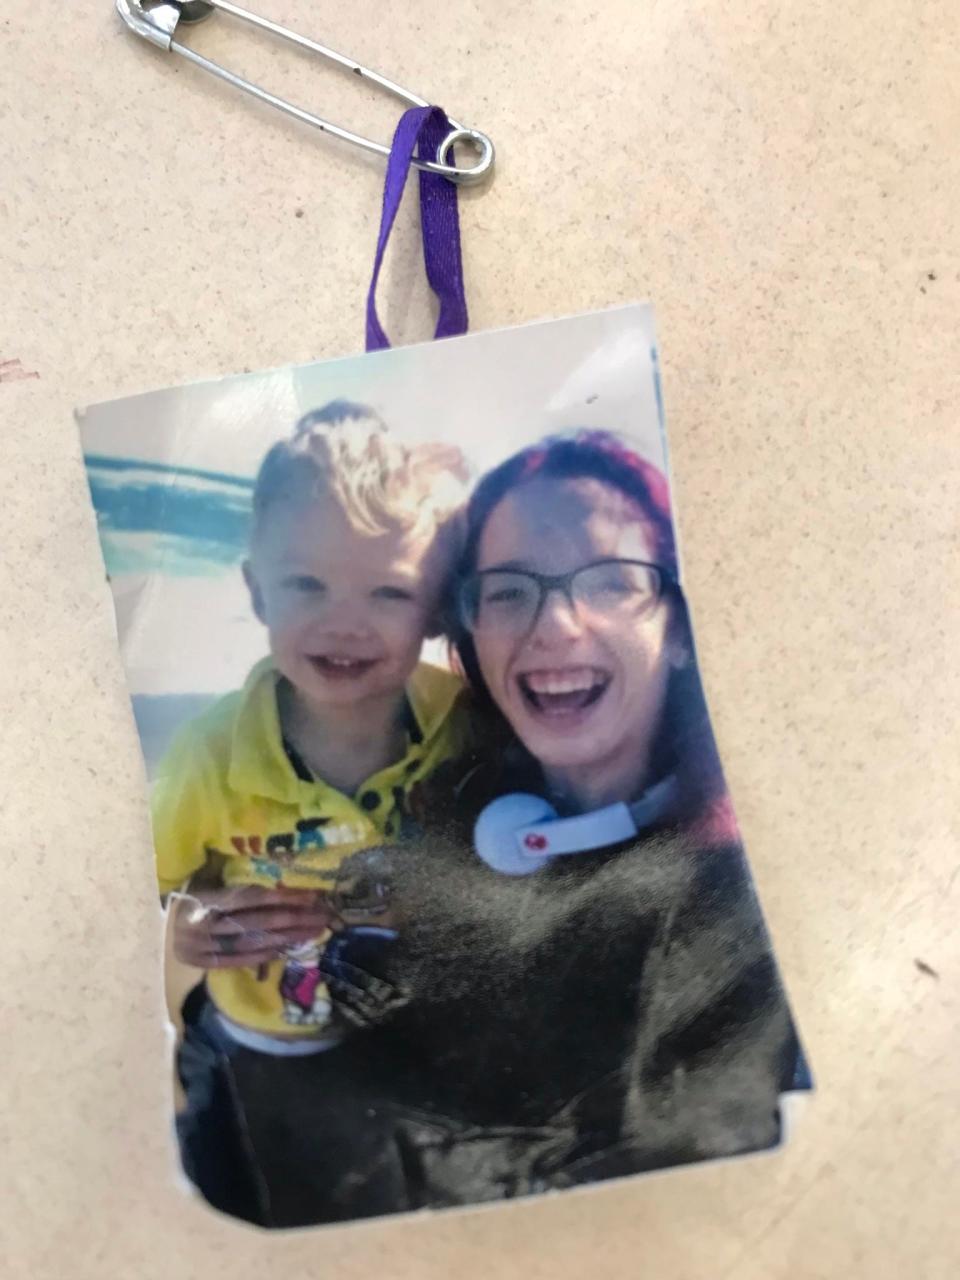 Tiny photographs of Karissa Fretwell beaming and holding her son, Billy, with purple ribbons attached to safety pins, were handed out at their July 7, 2019 celebration of life. Purple was Karissa’s favorite color.